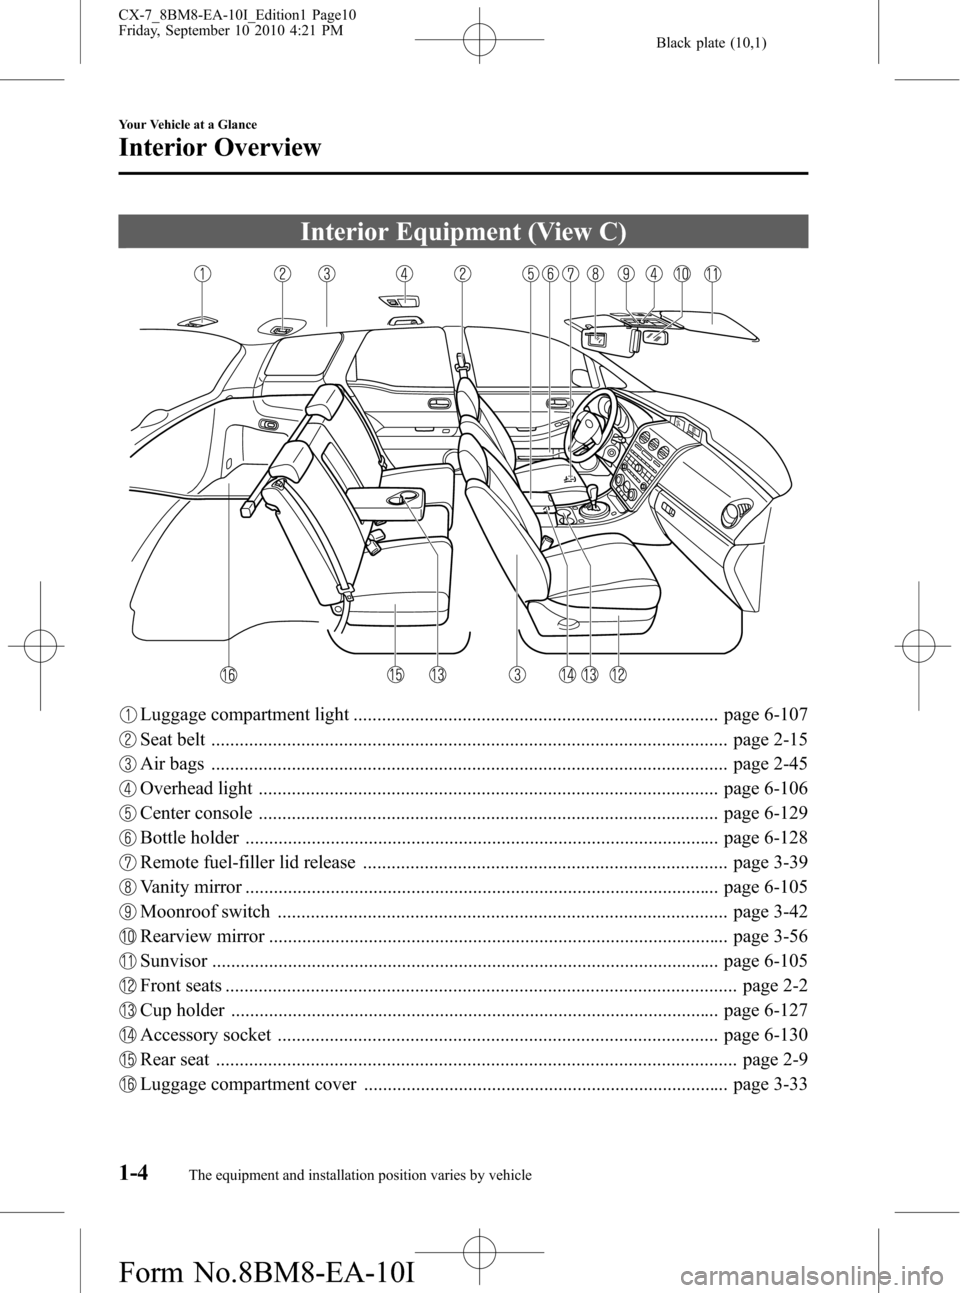 MAZDA MODEL CX-7 2011  Owners Manual (in English) Black plate (10,1)
Interior Equipment (View C)
Luggage compartment light ............................................................................. page 6-107
Seat belt ............................